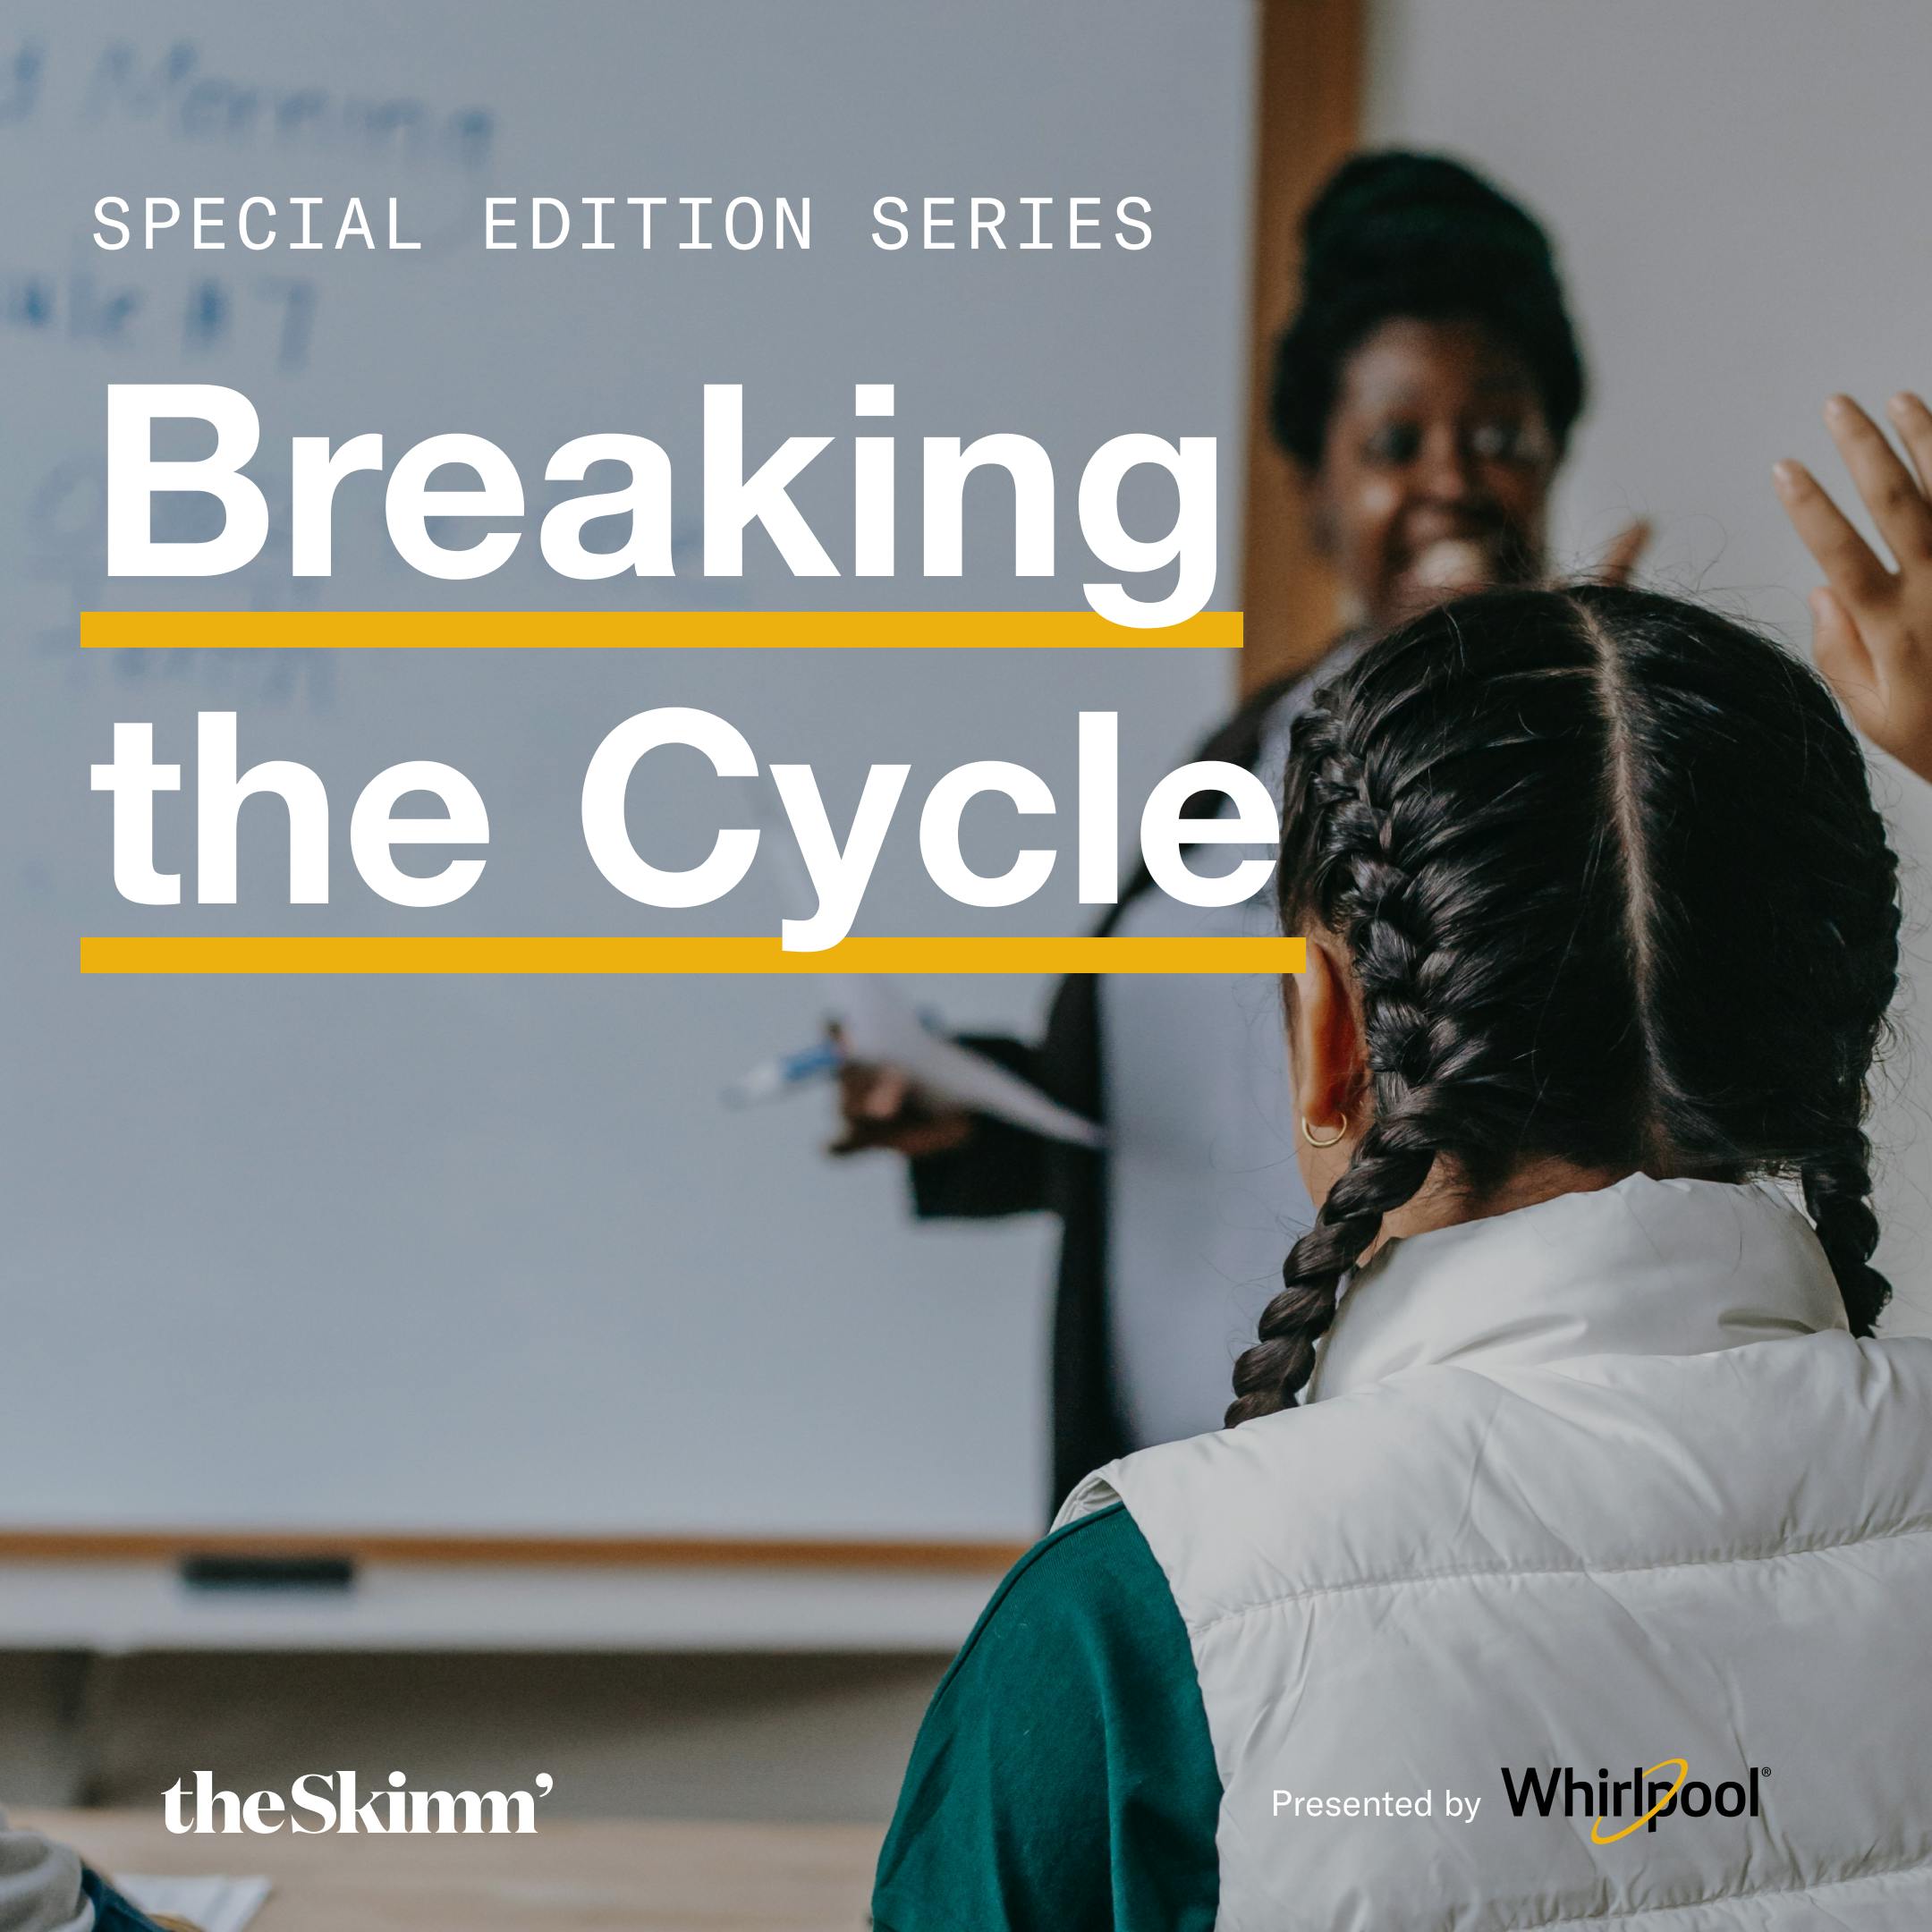 Breaking the Cycle: Exposing a Hidden Educational Crisis